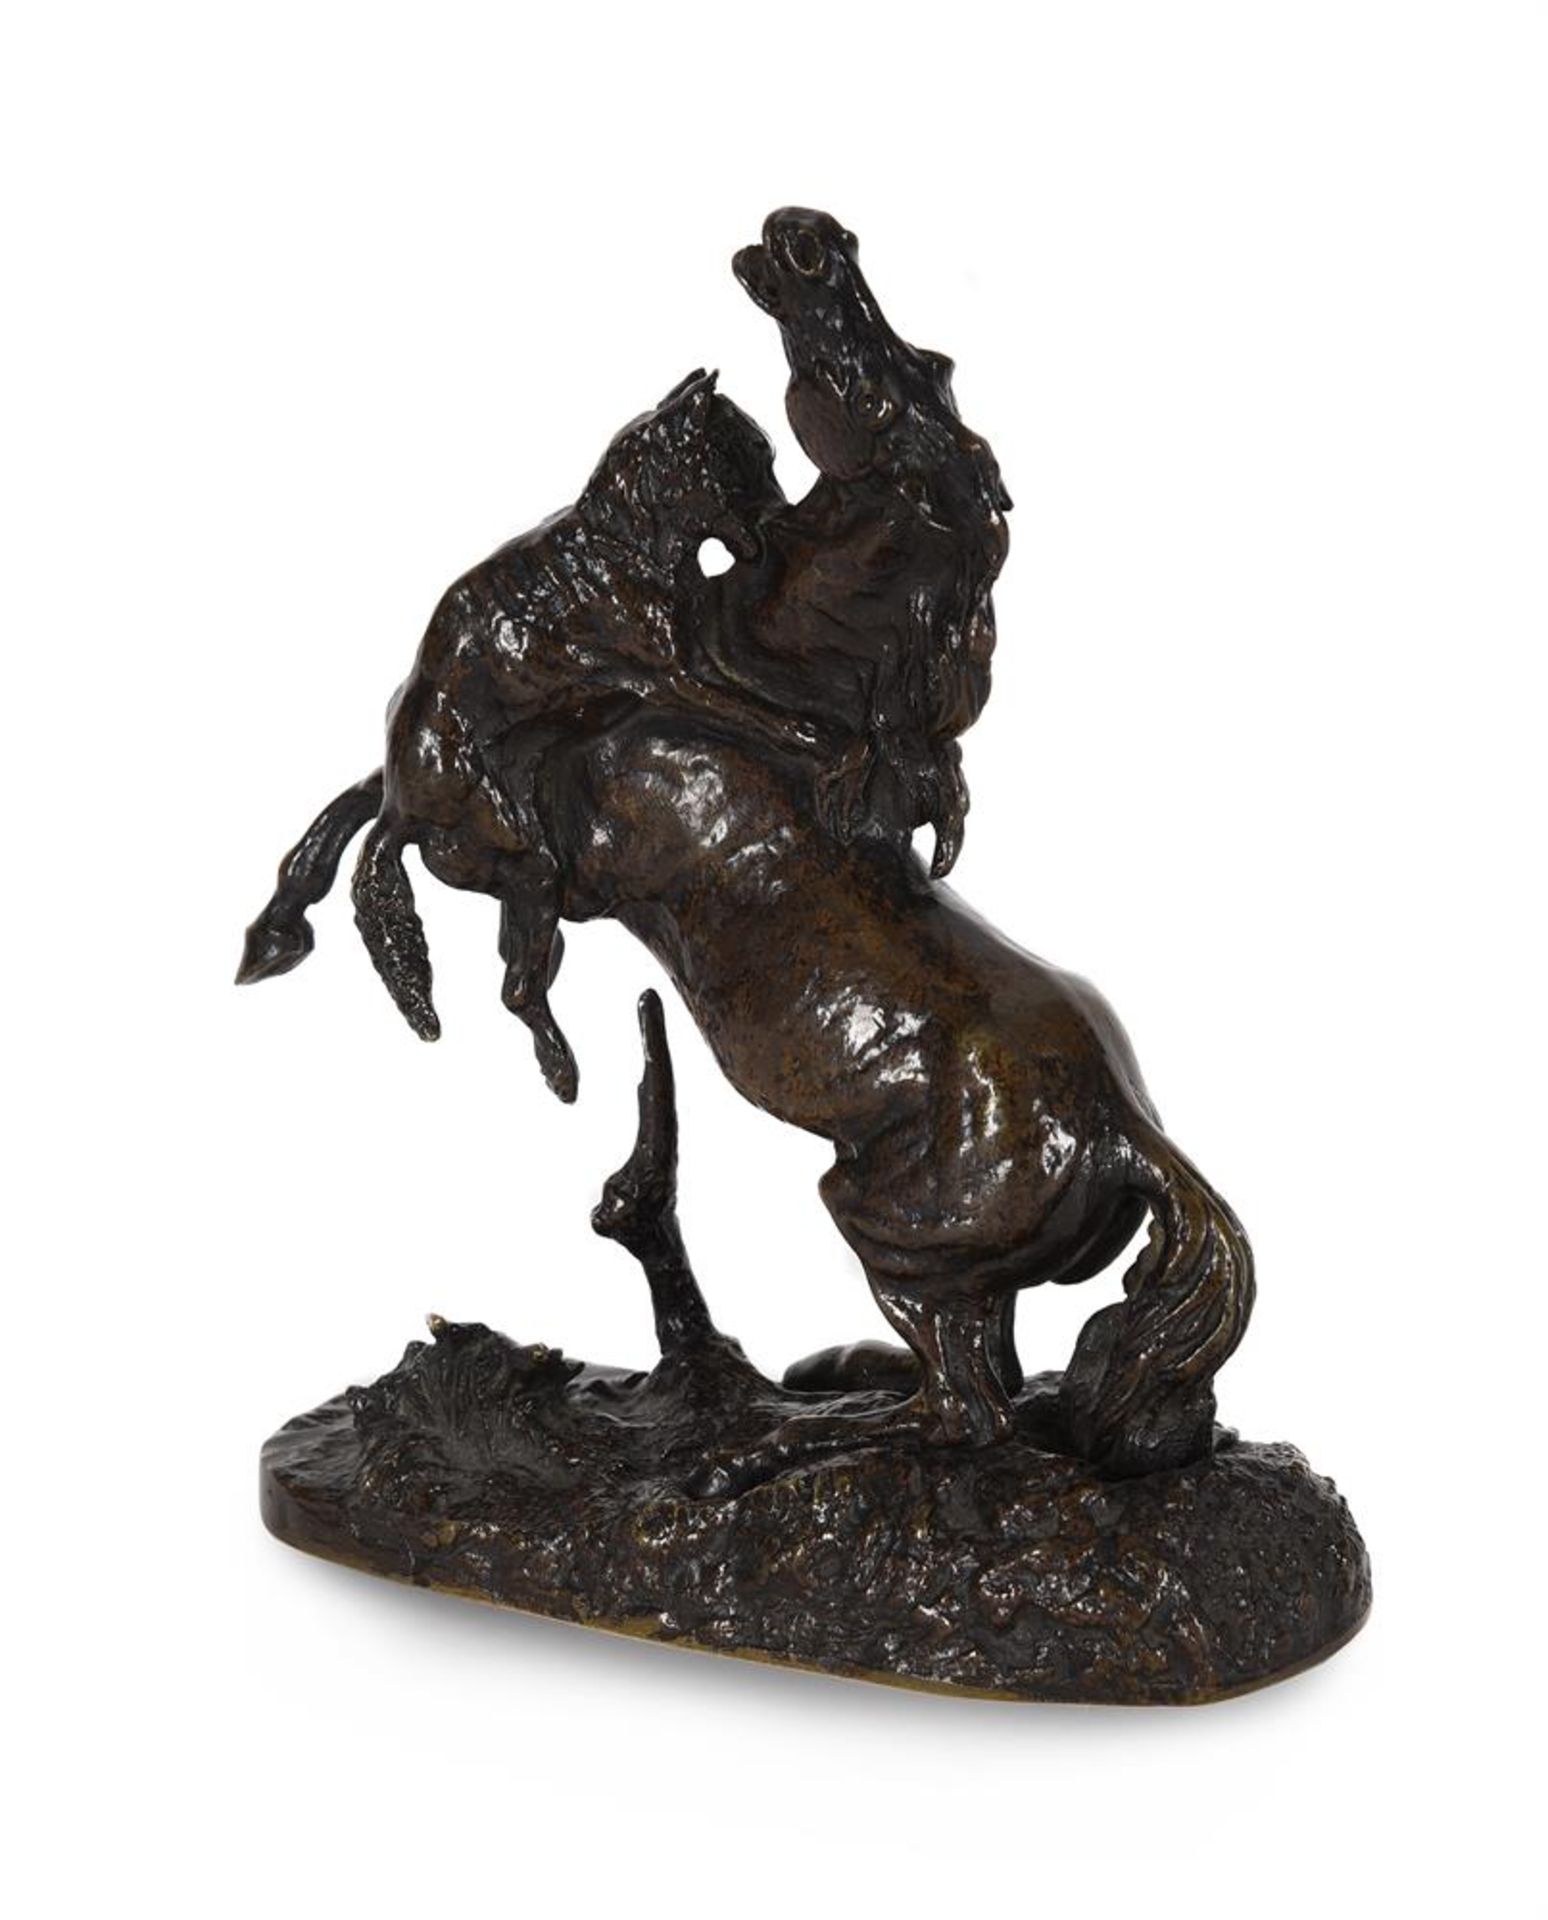 PIERRE-JULES MÊNE (1810-1879), A RARE BRONZE FIGURE OF REYNARD/LOUP ET CHEVAL, FRENCH, LATE 19TH CEN - Image 2 of 4